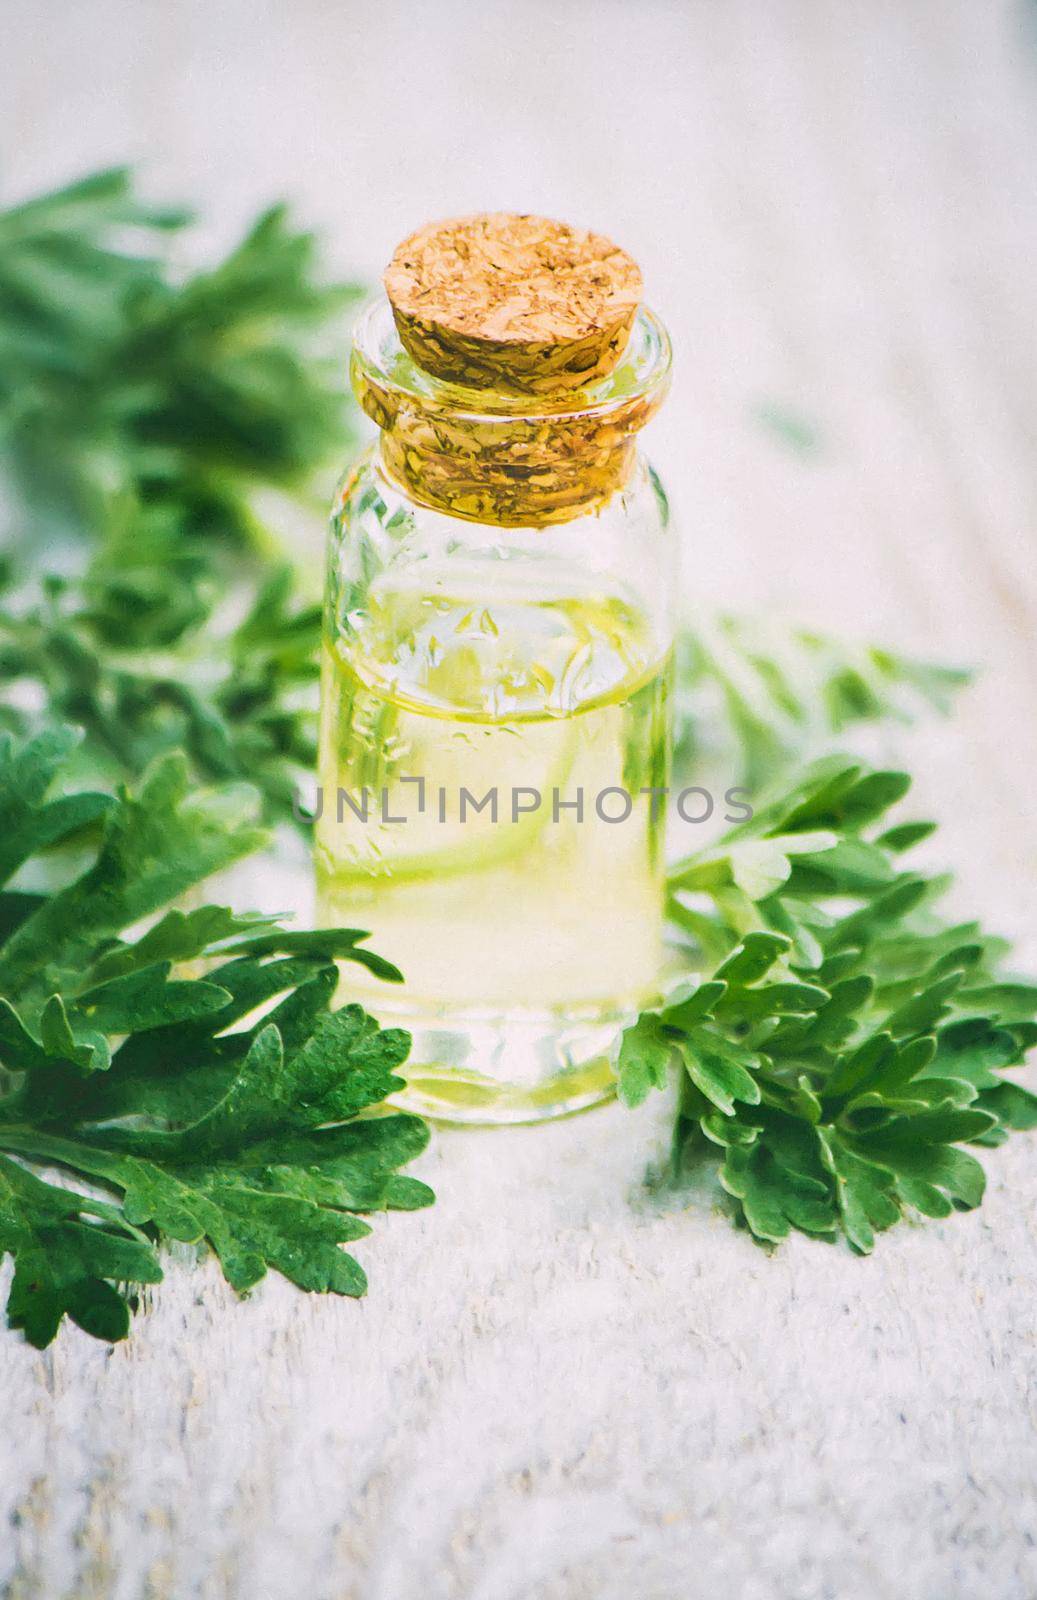 wormwood extract in a small jar. Selective focus. nature.